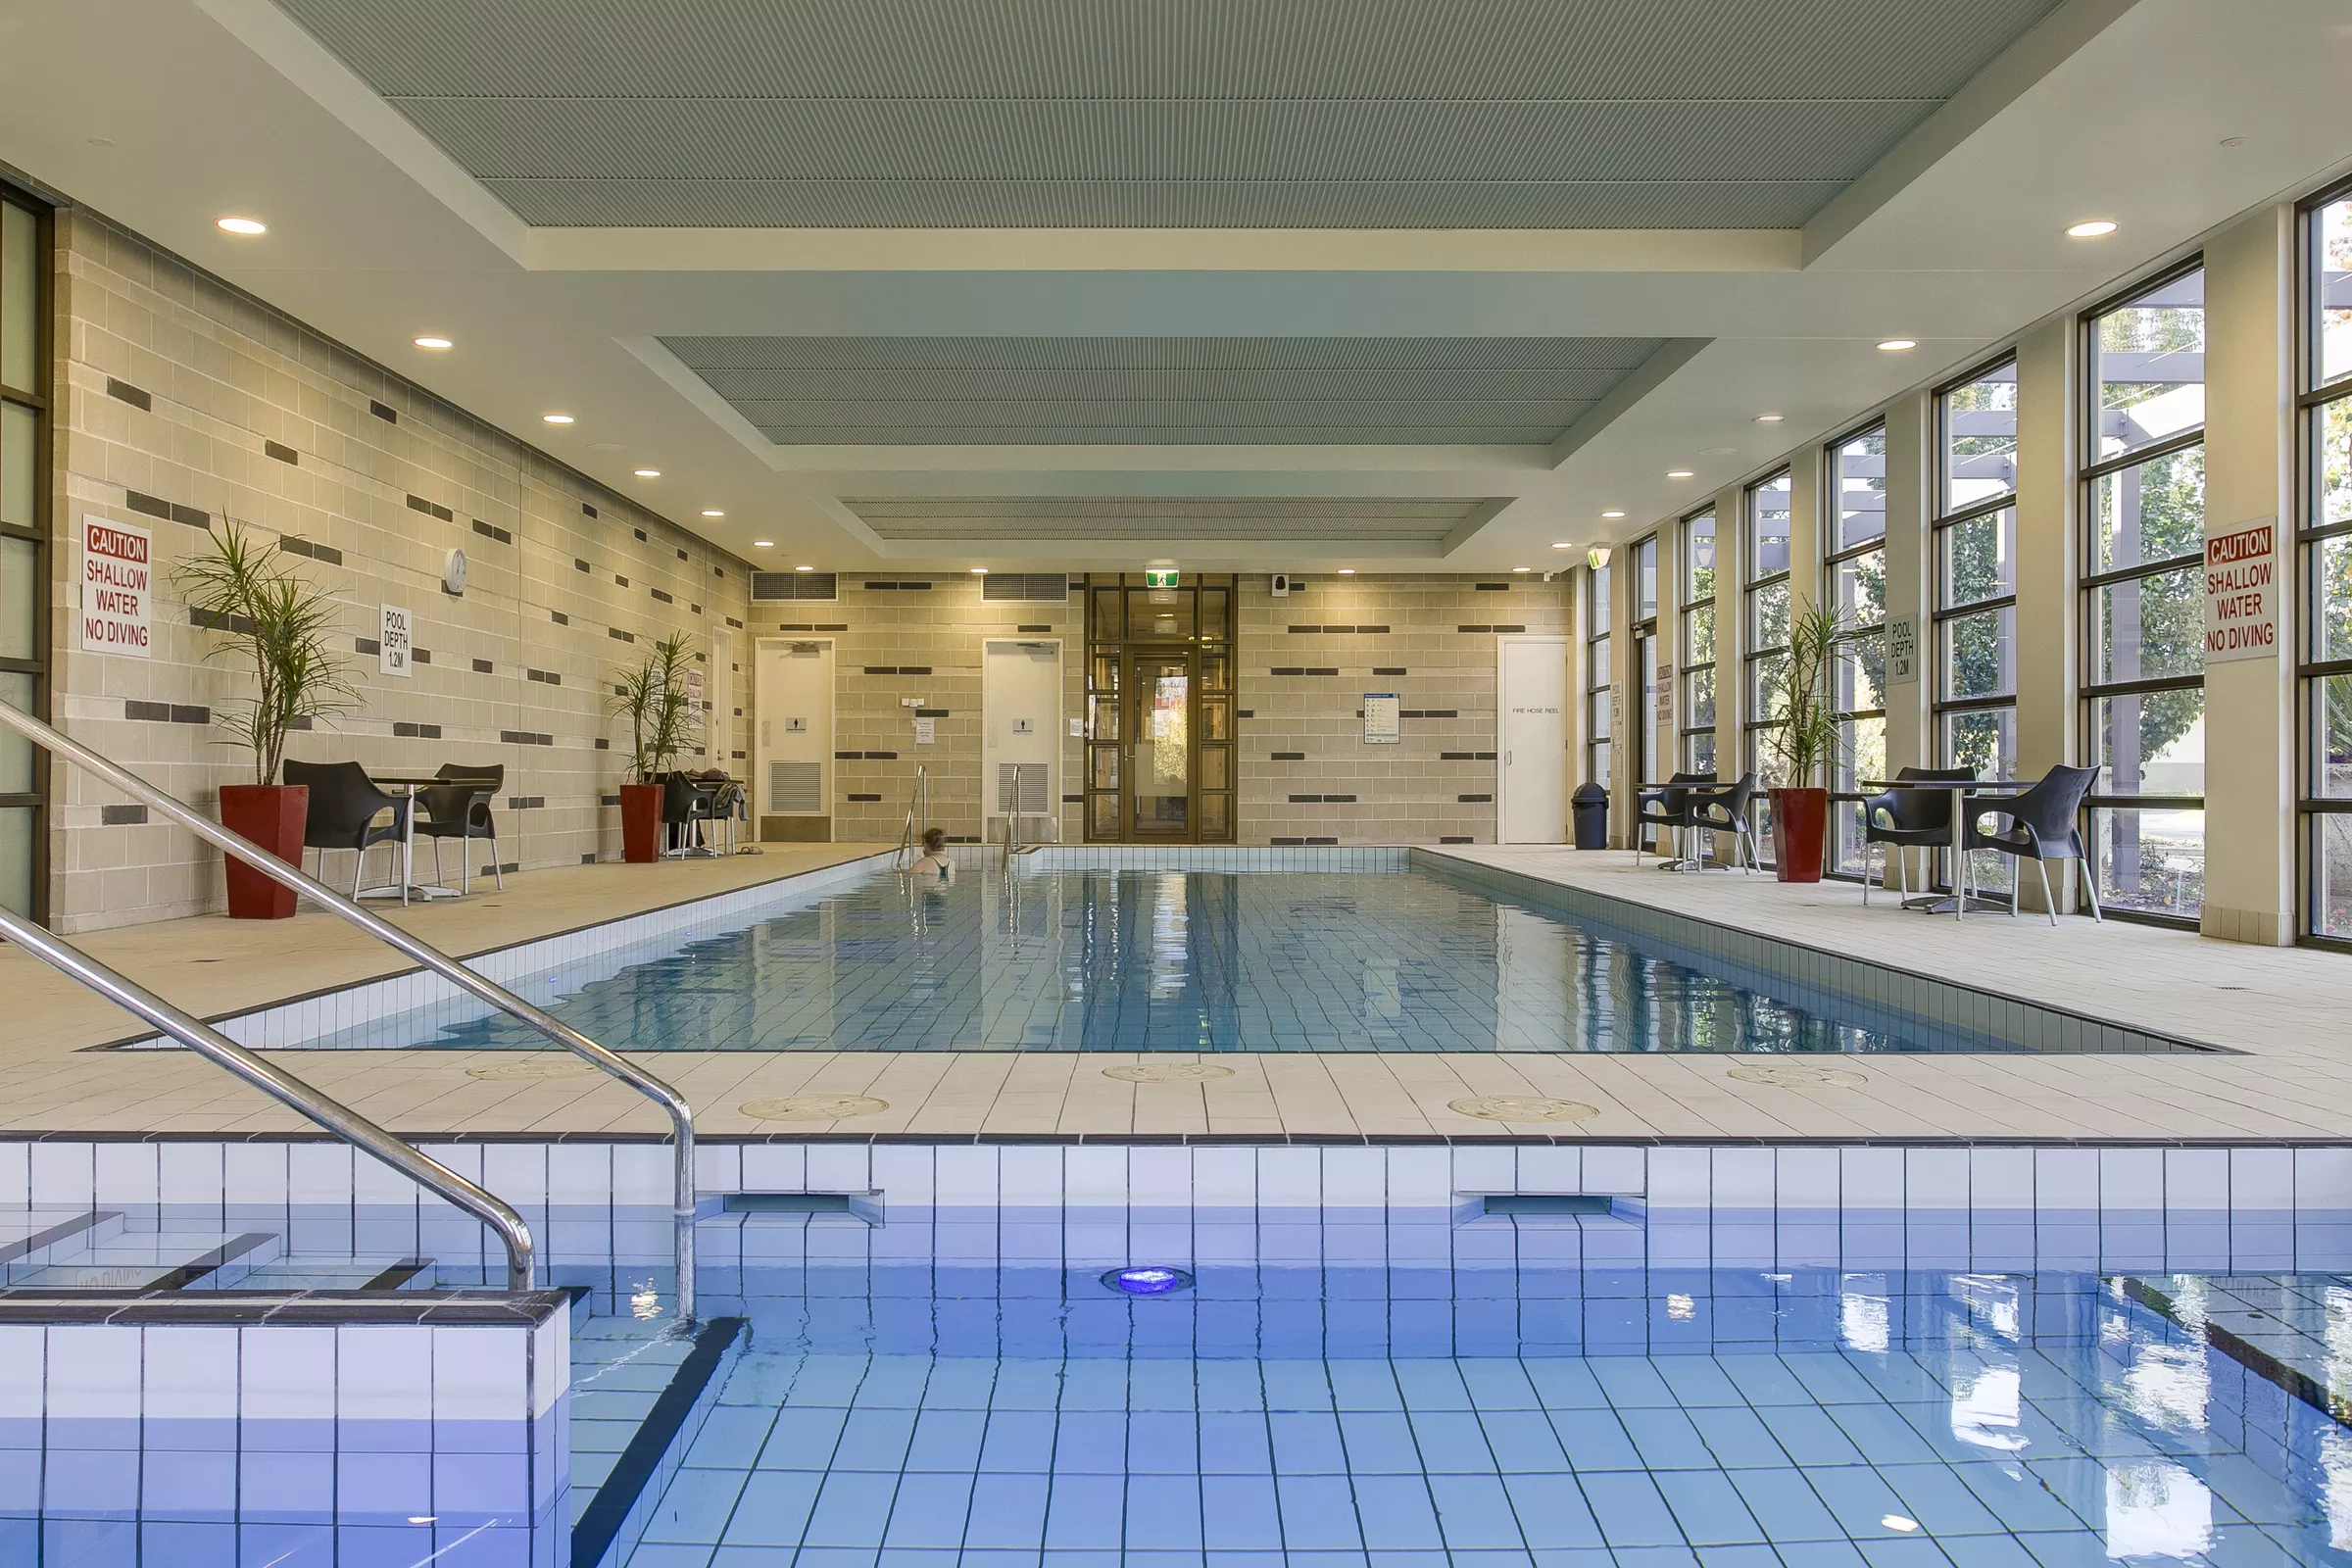 Woodlands Park good sized indoor swimming pool and spa